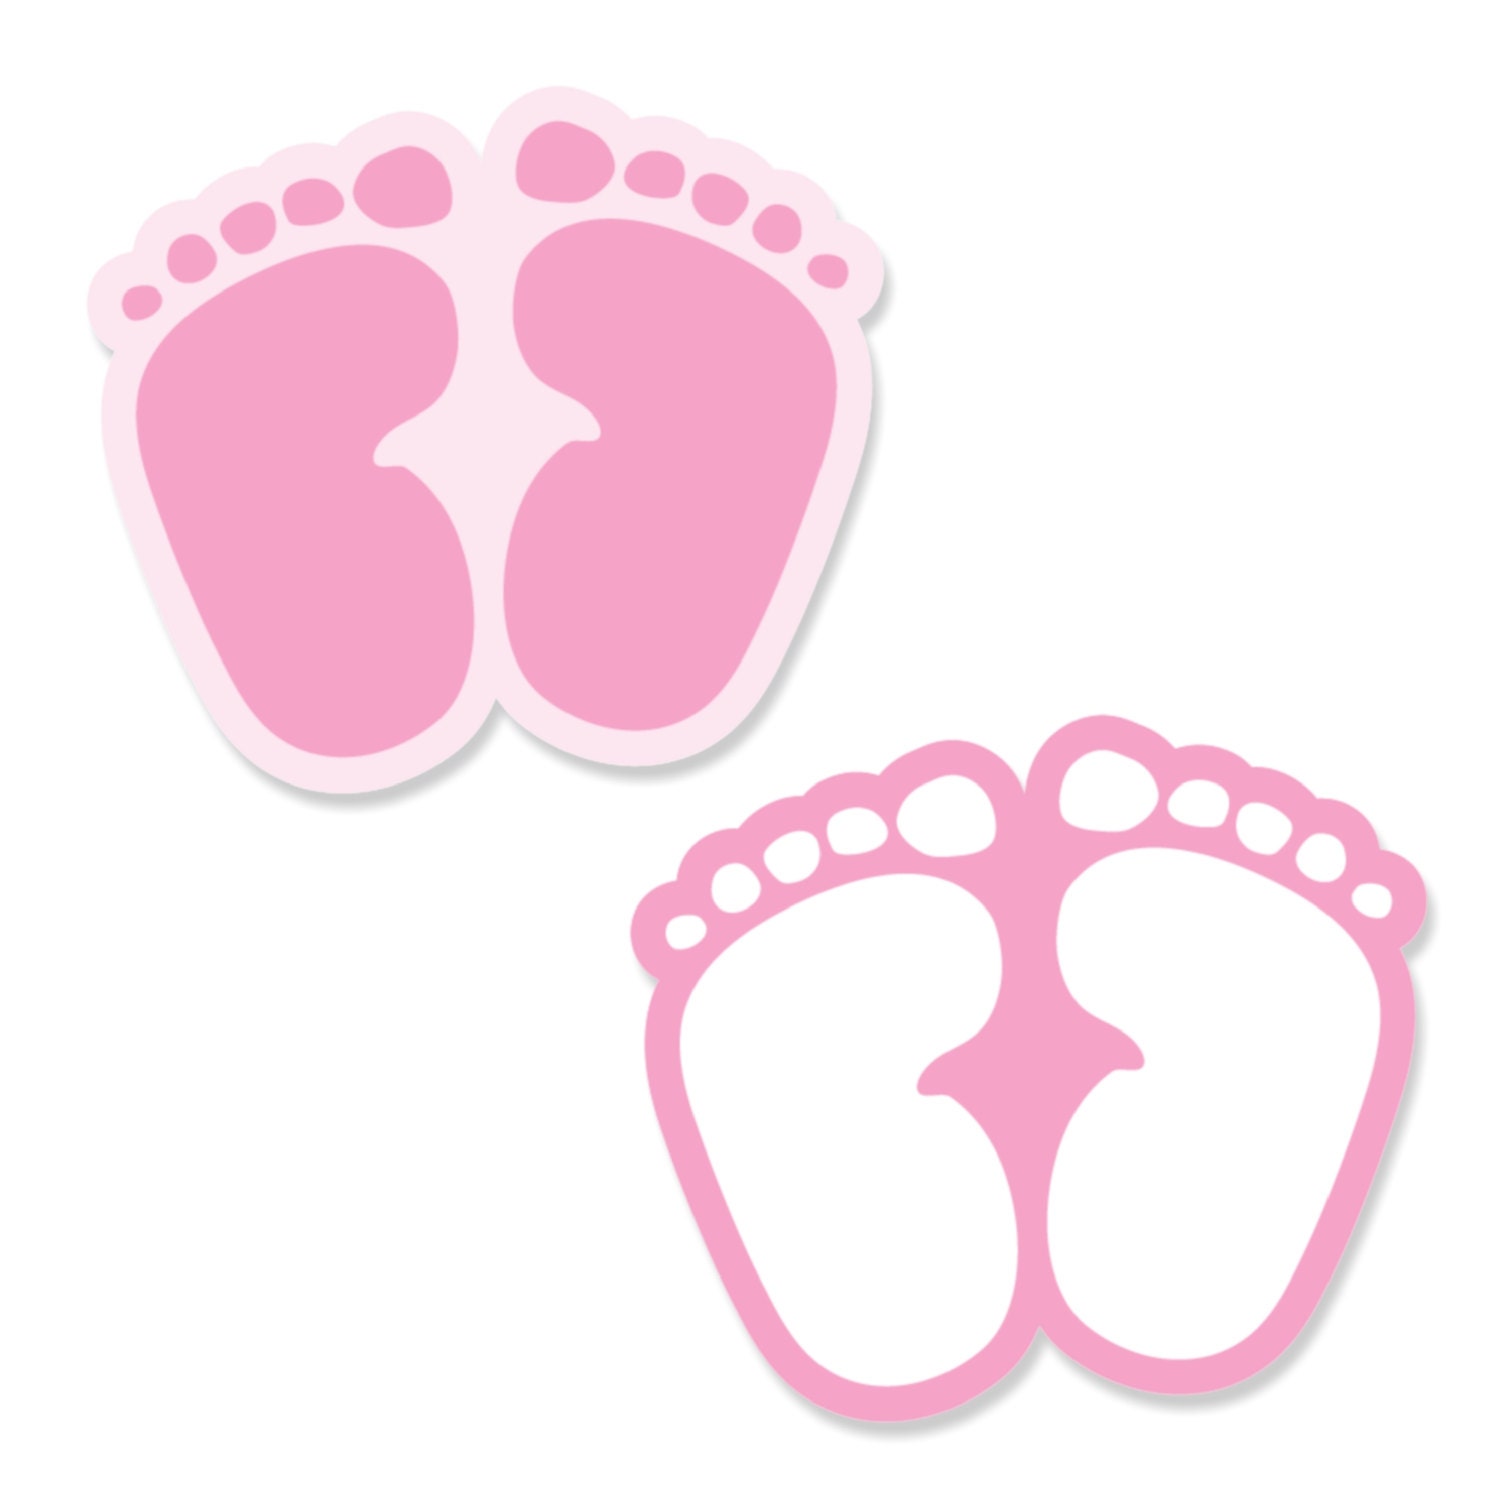 Download 24 pc. Small Baby Feet Pink Paper Cut Outs Baby Shower or ...